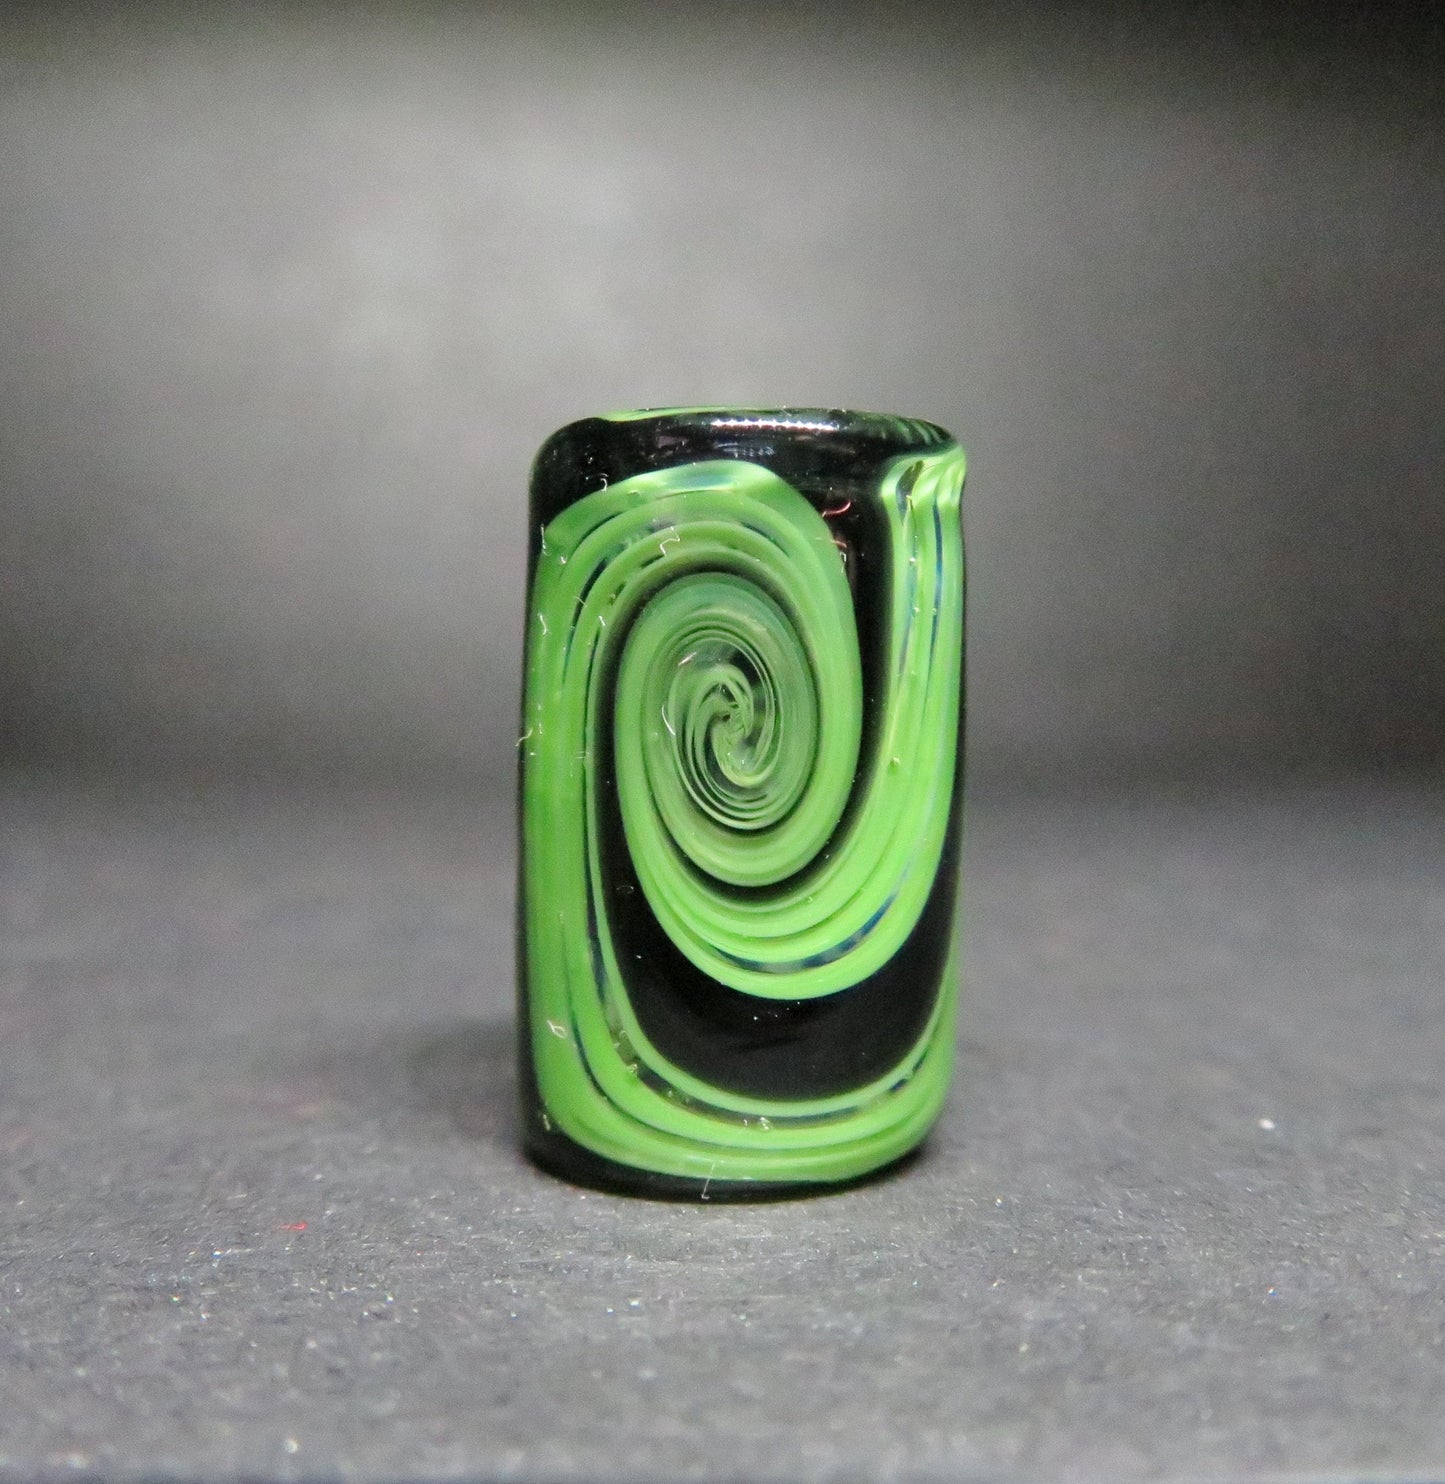 Leafy Green Glass Dread Bead, CUSTOM Style and sizes Options